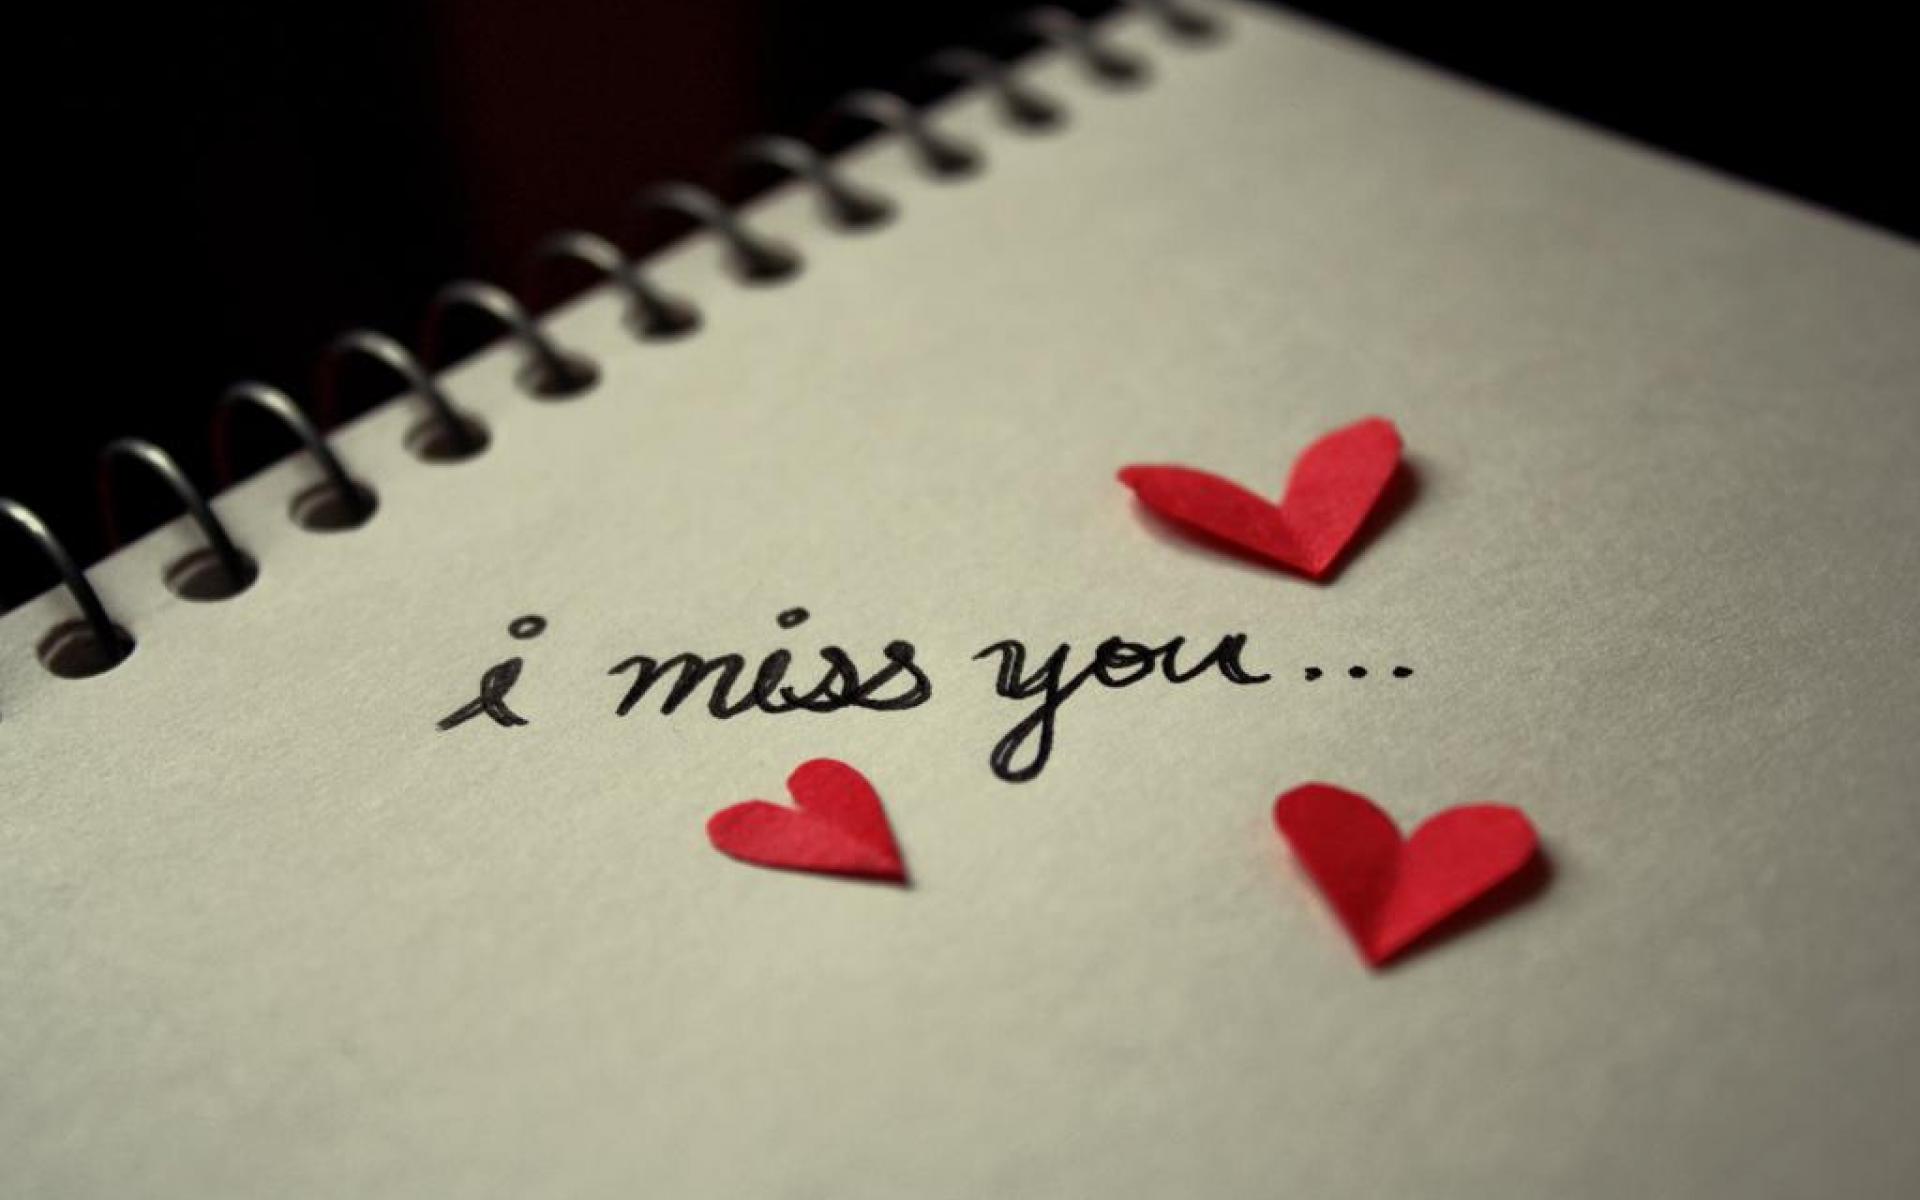 I Miss You Wallpaper And Pictures 2015